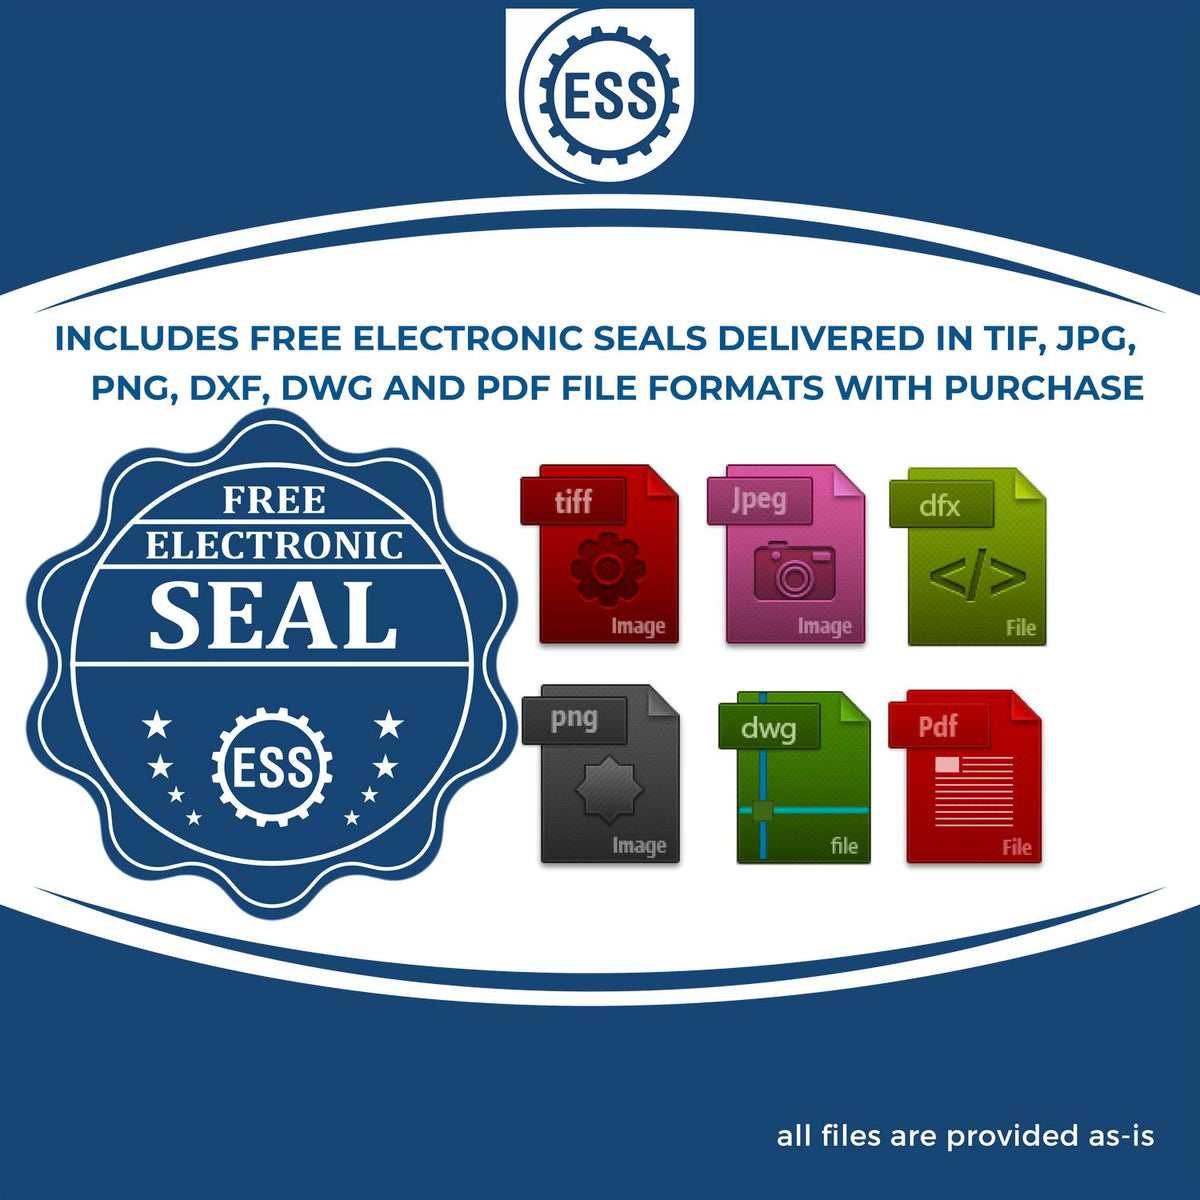 An infographic for the free electronic seal for the Gift Utah Land Surveyor Seal illustrating the different file type icons such as DXF, DWG, TIF, JPG and PNG.